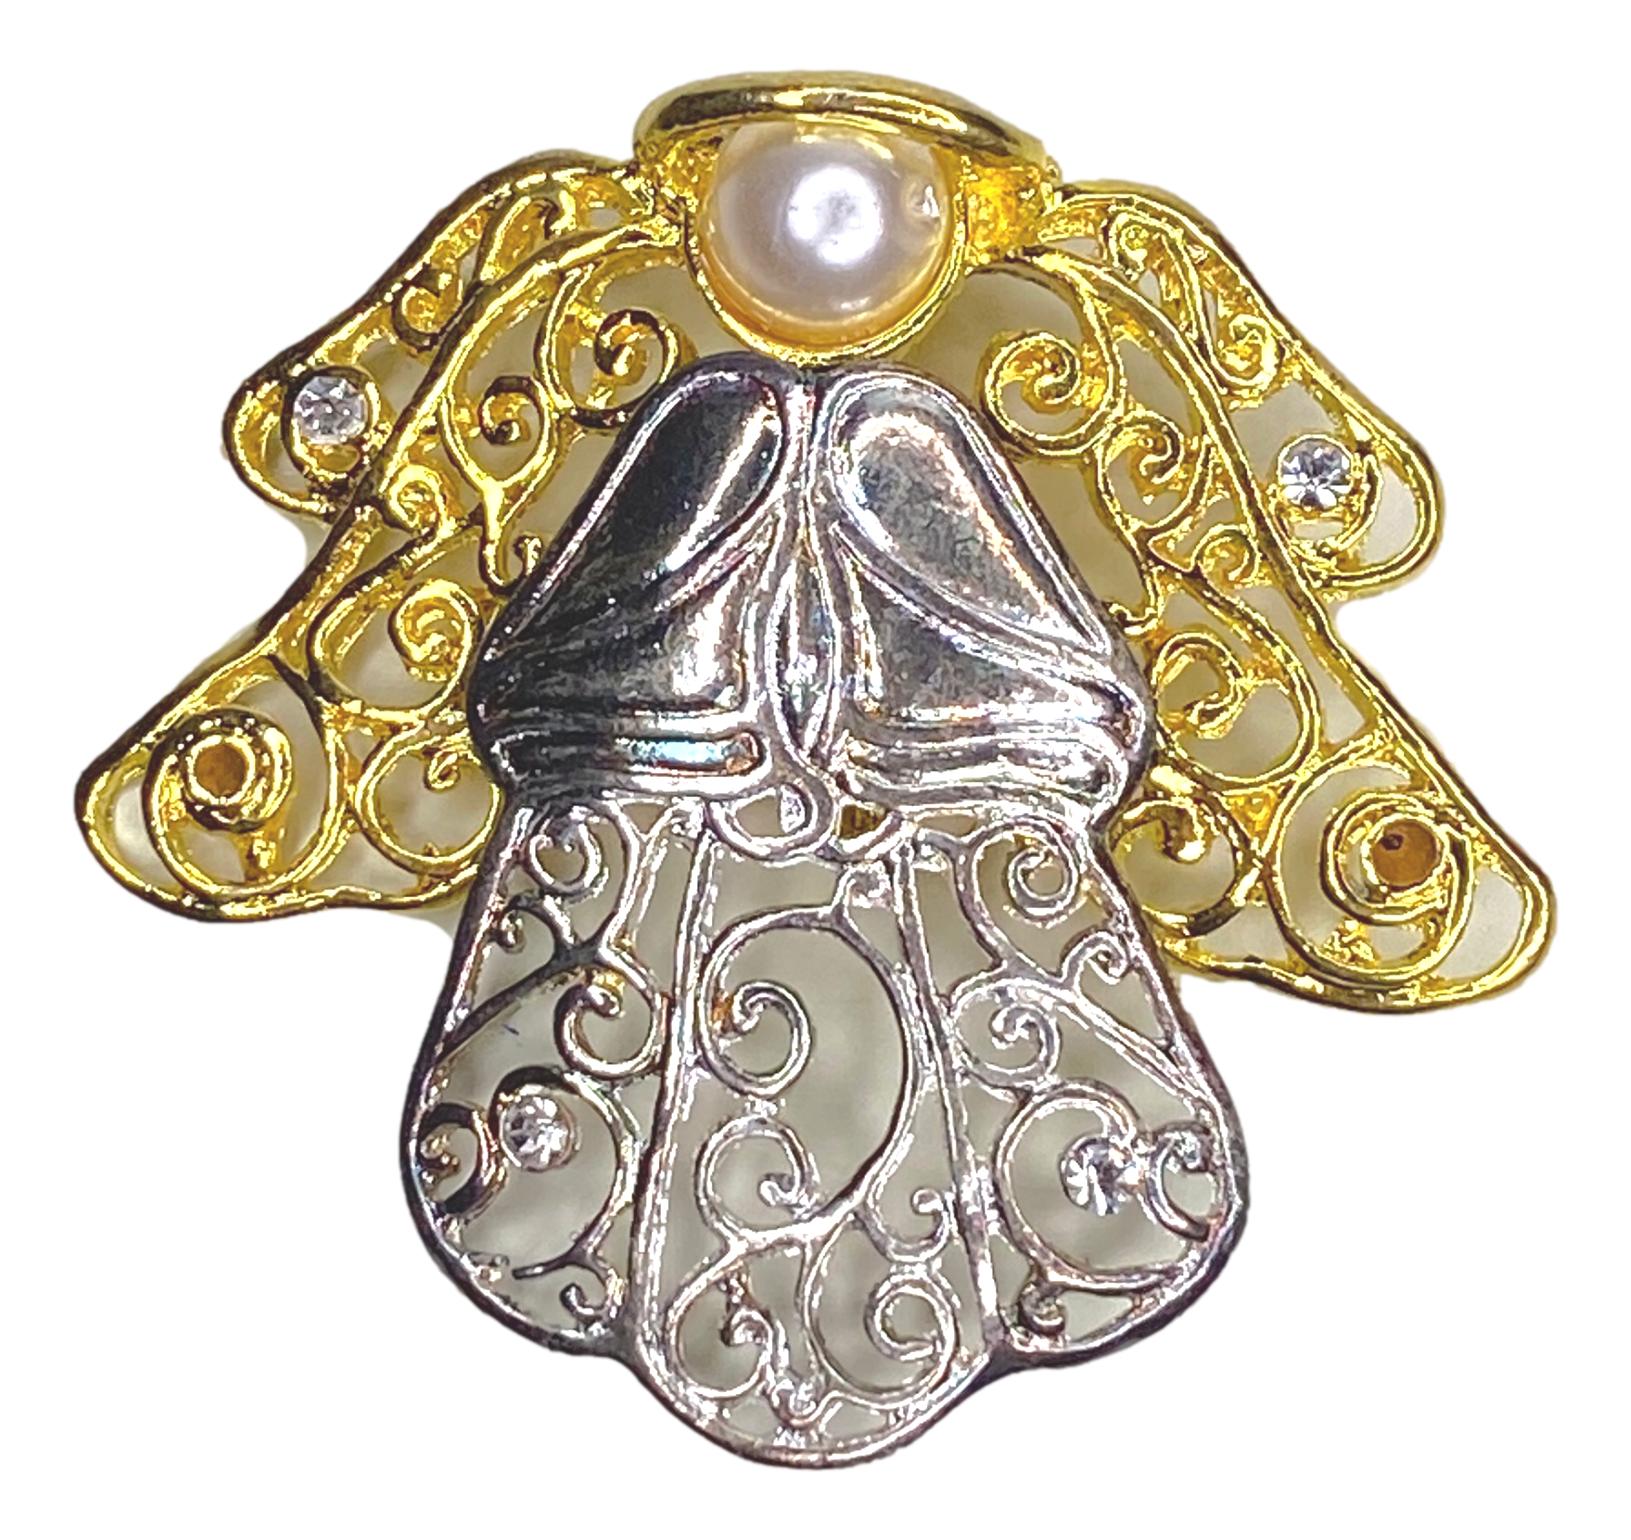 Lapel Pin Pewter Angel Pearl Head Rhinestone Embellishments 2 1/4 L x 2 1/2 W Inches - Ysleta Mission Gift Shop- VOTED 2022 El Paso's Best Gift Shop